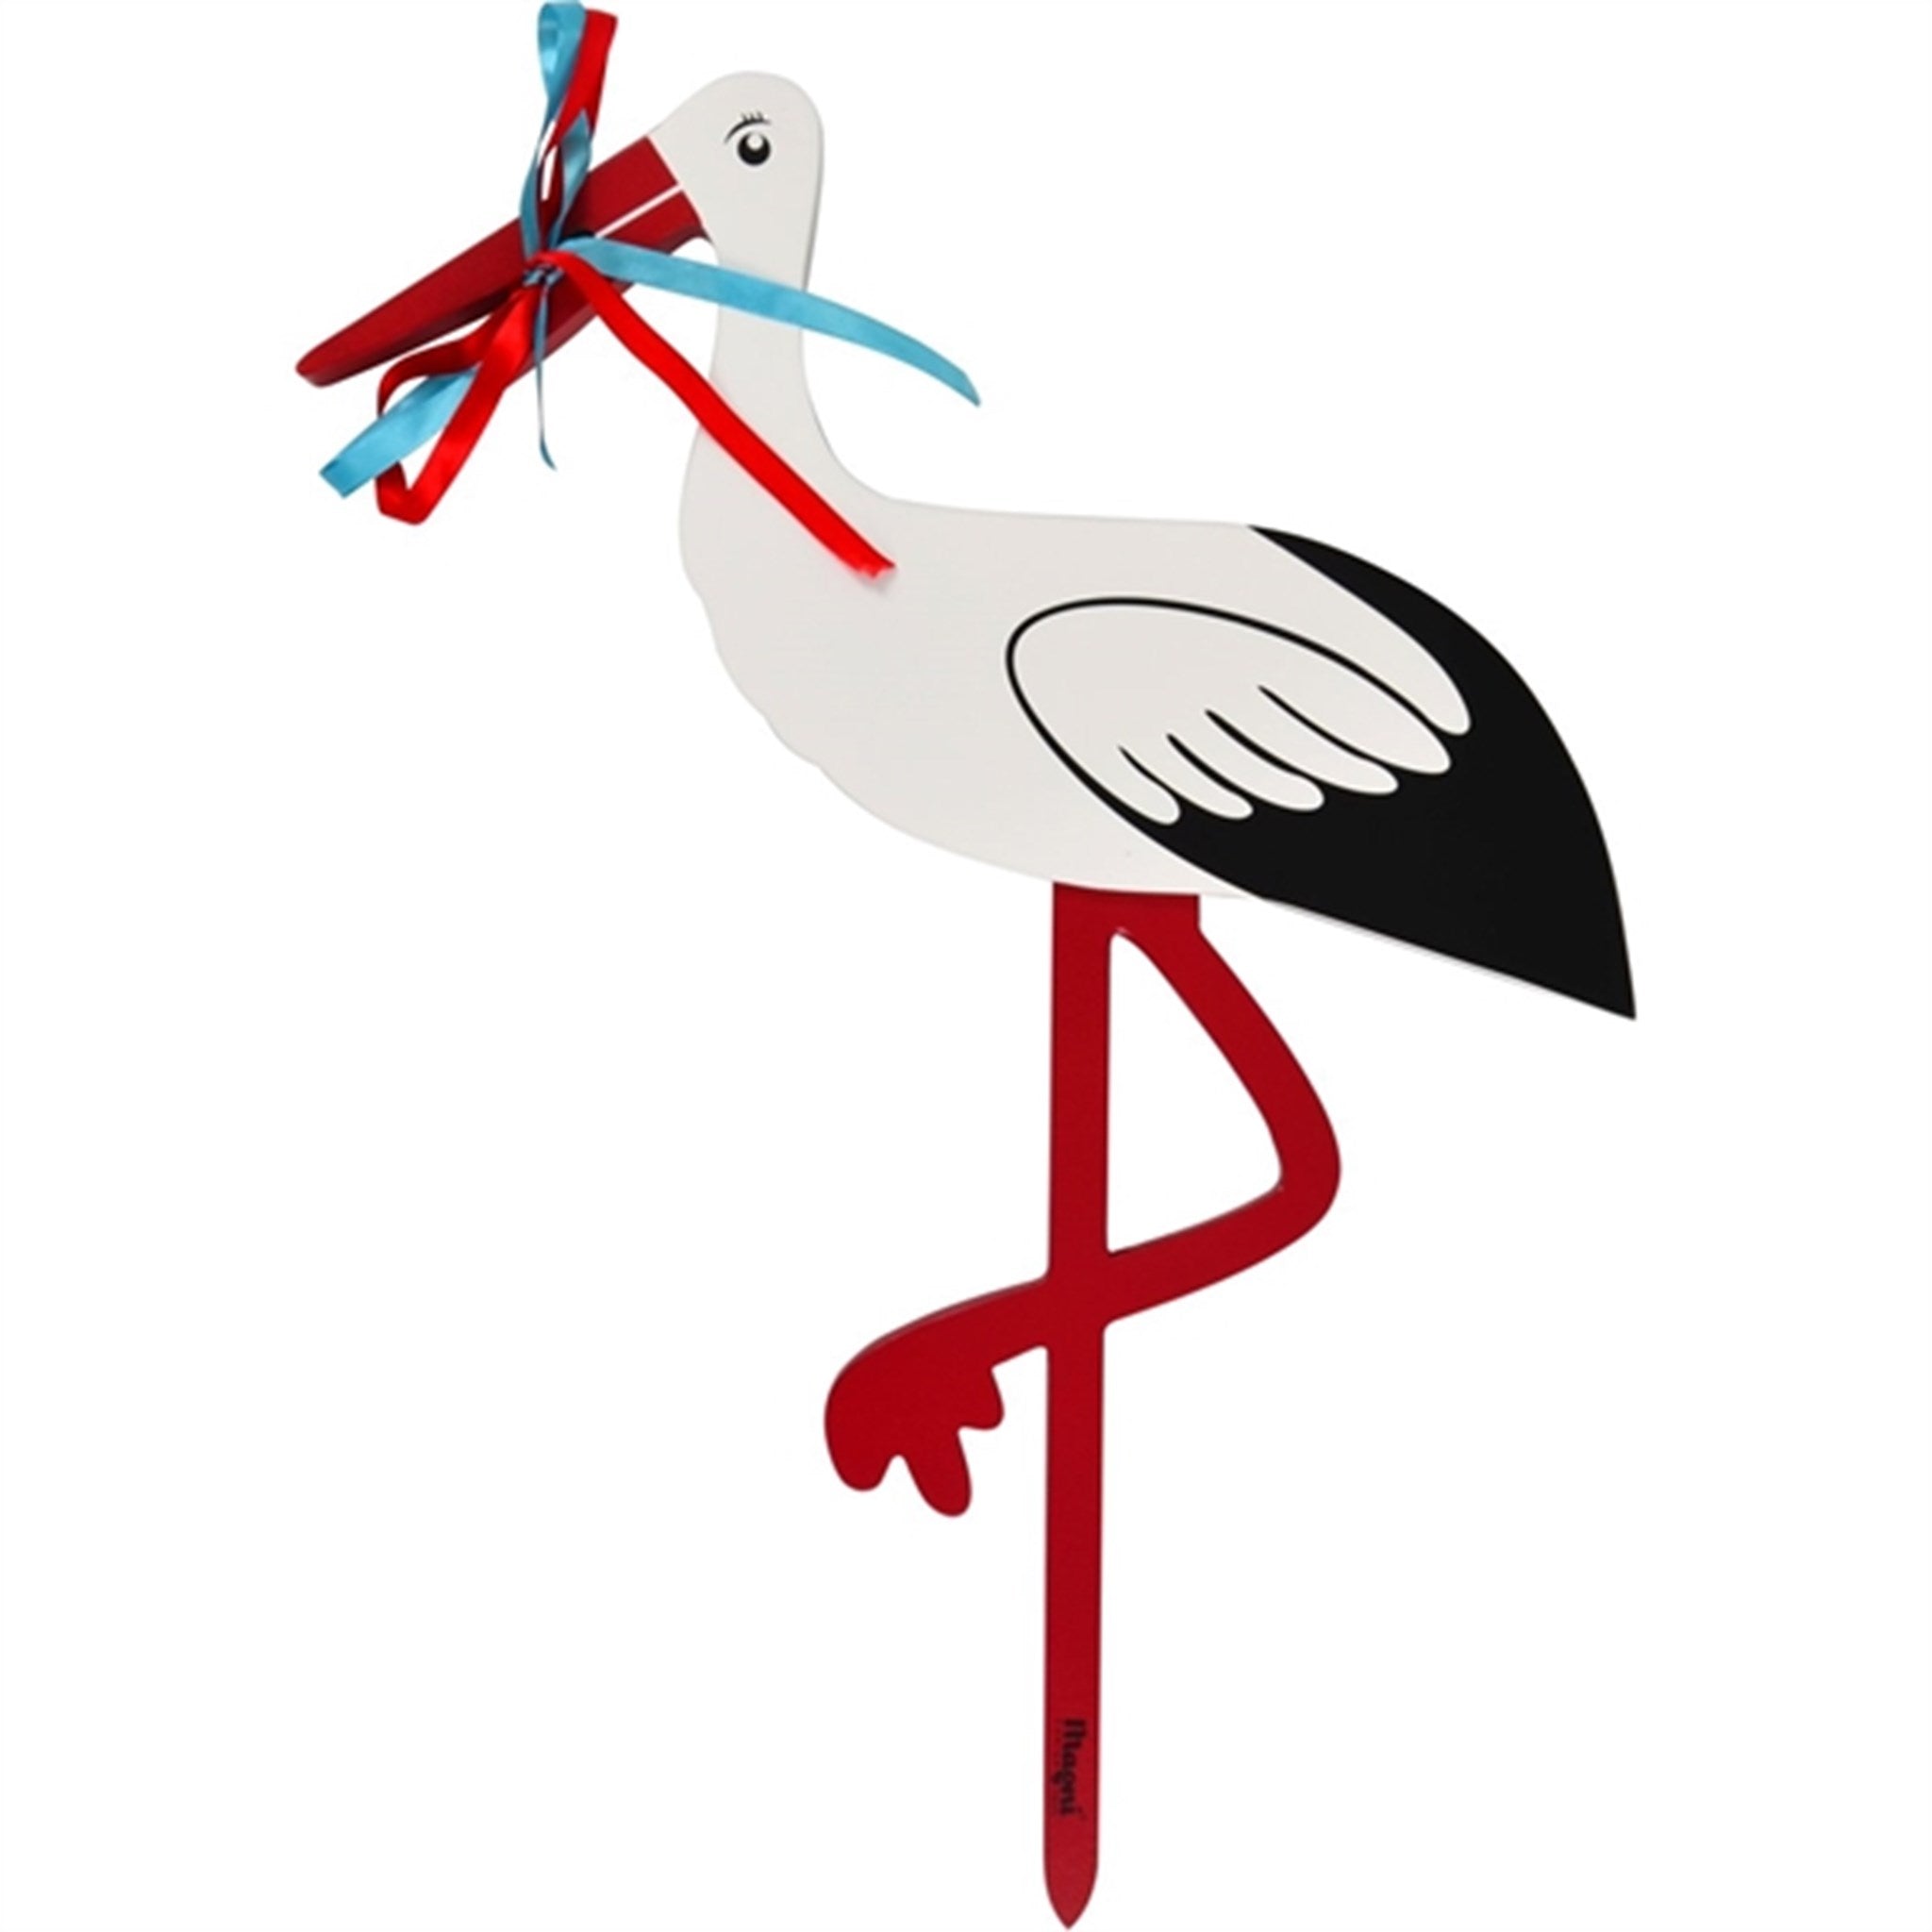 Magni Wooden Birth Stork with Red and Blue Ribbon